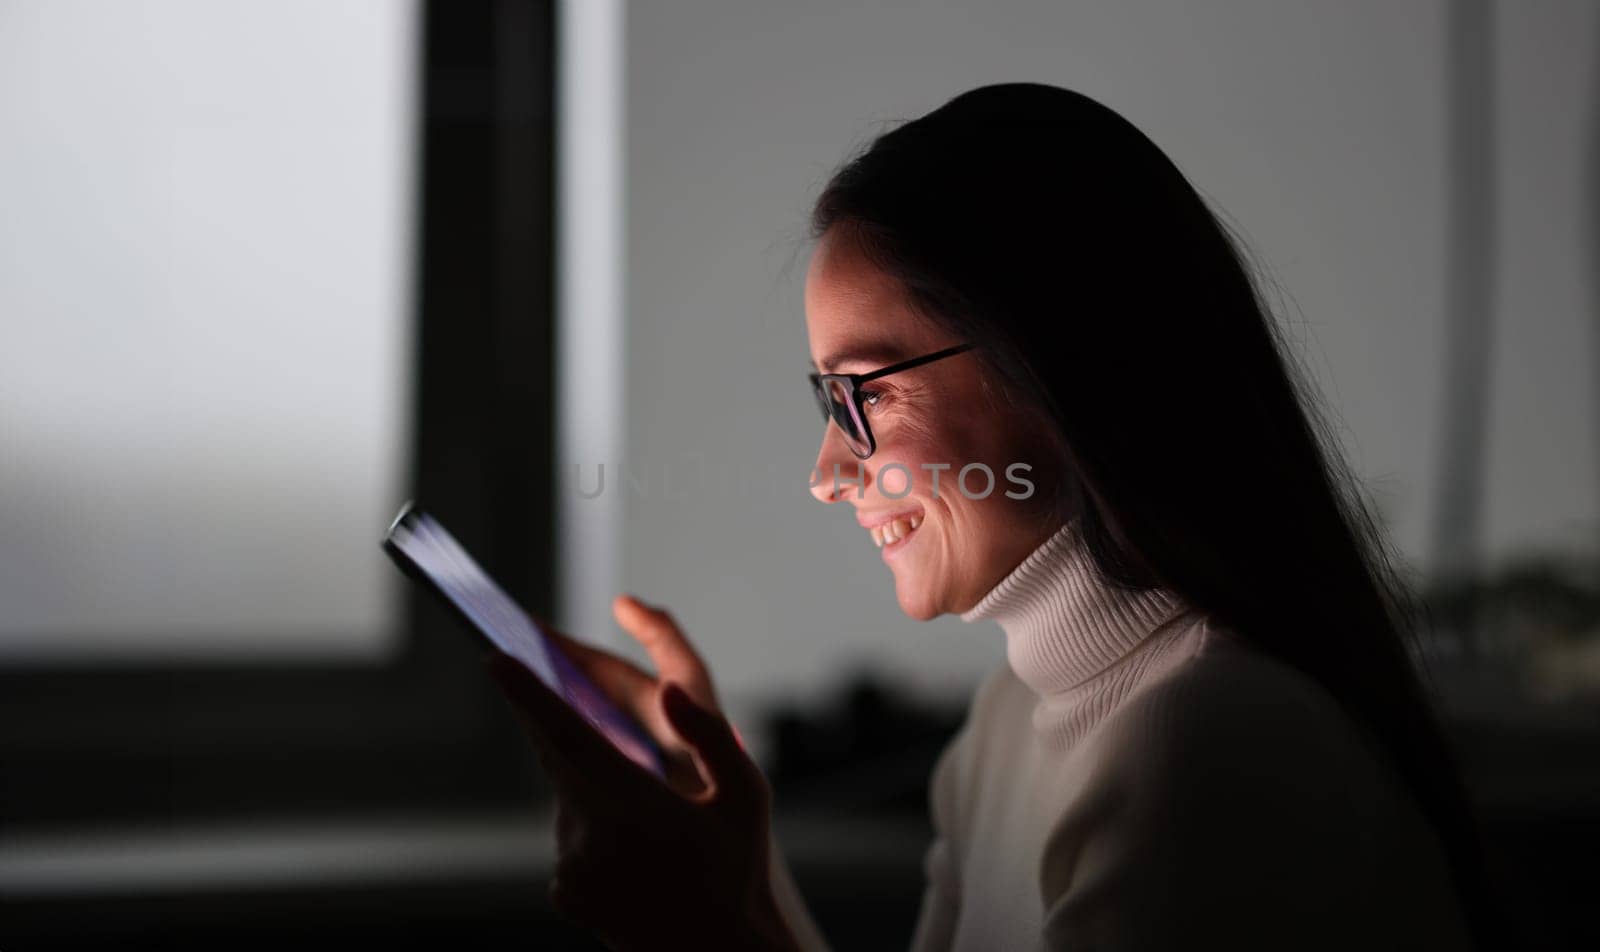 Young woman holding mobile phone at night. Communication in social media concept